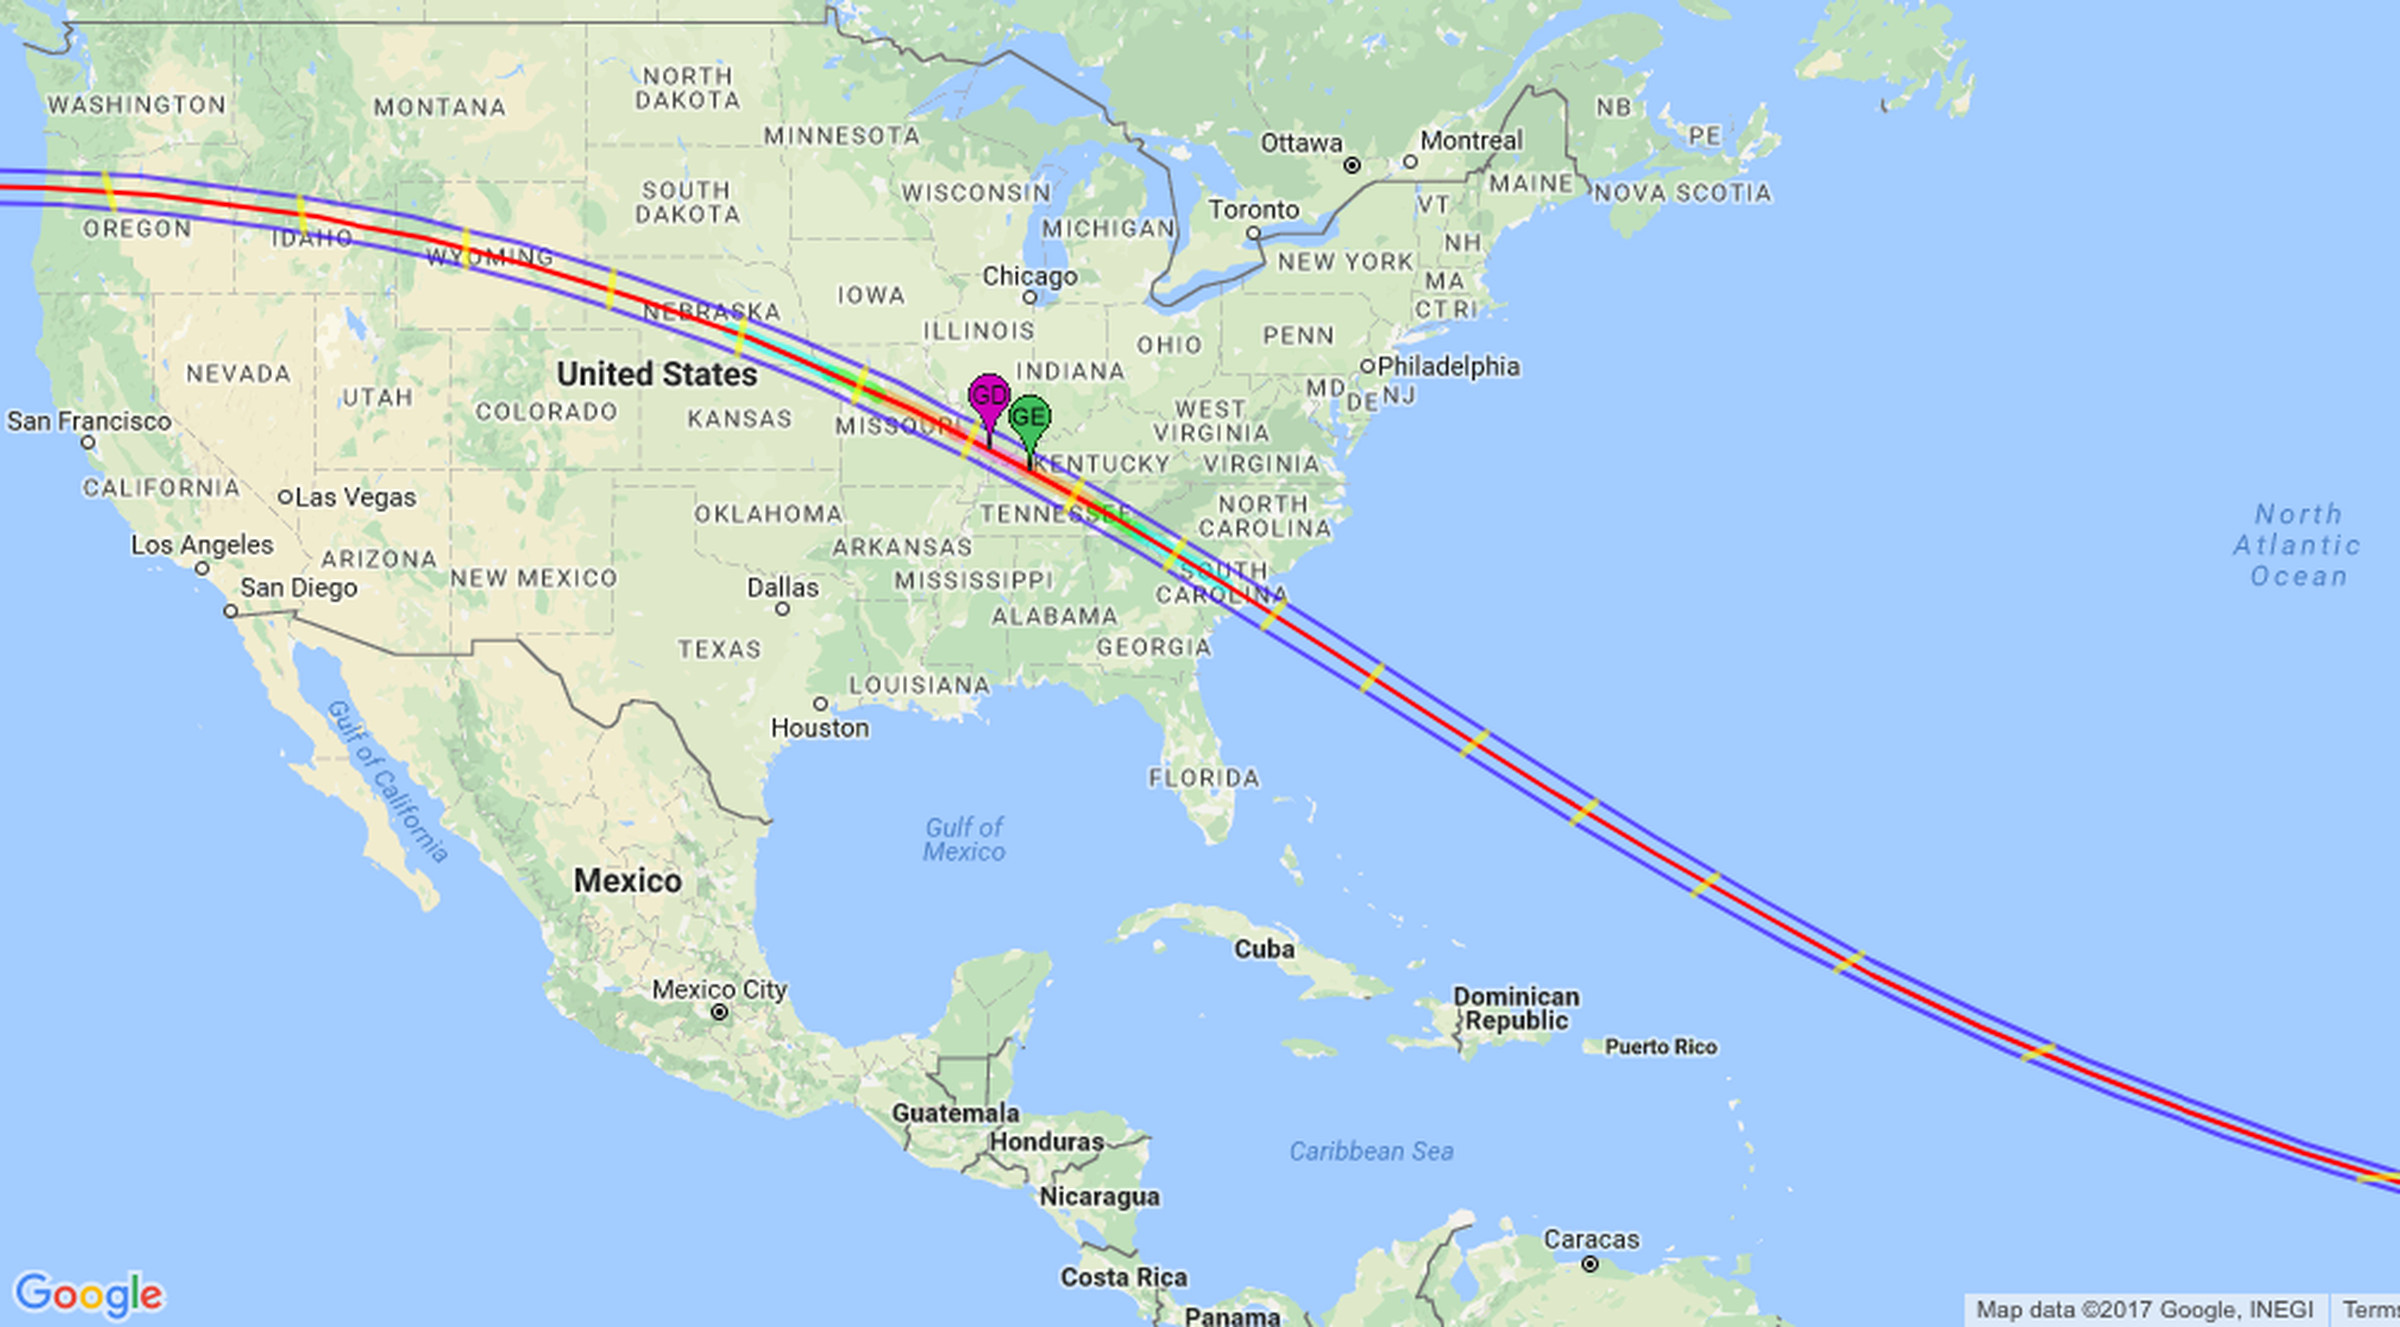 This is the path the Great American Eclipse will take on August 21st.